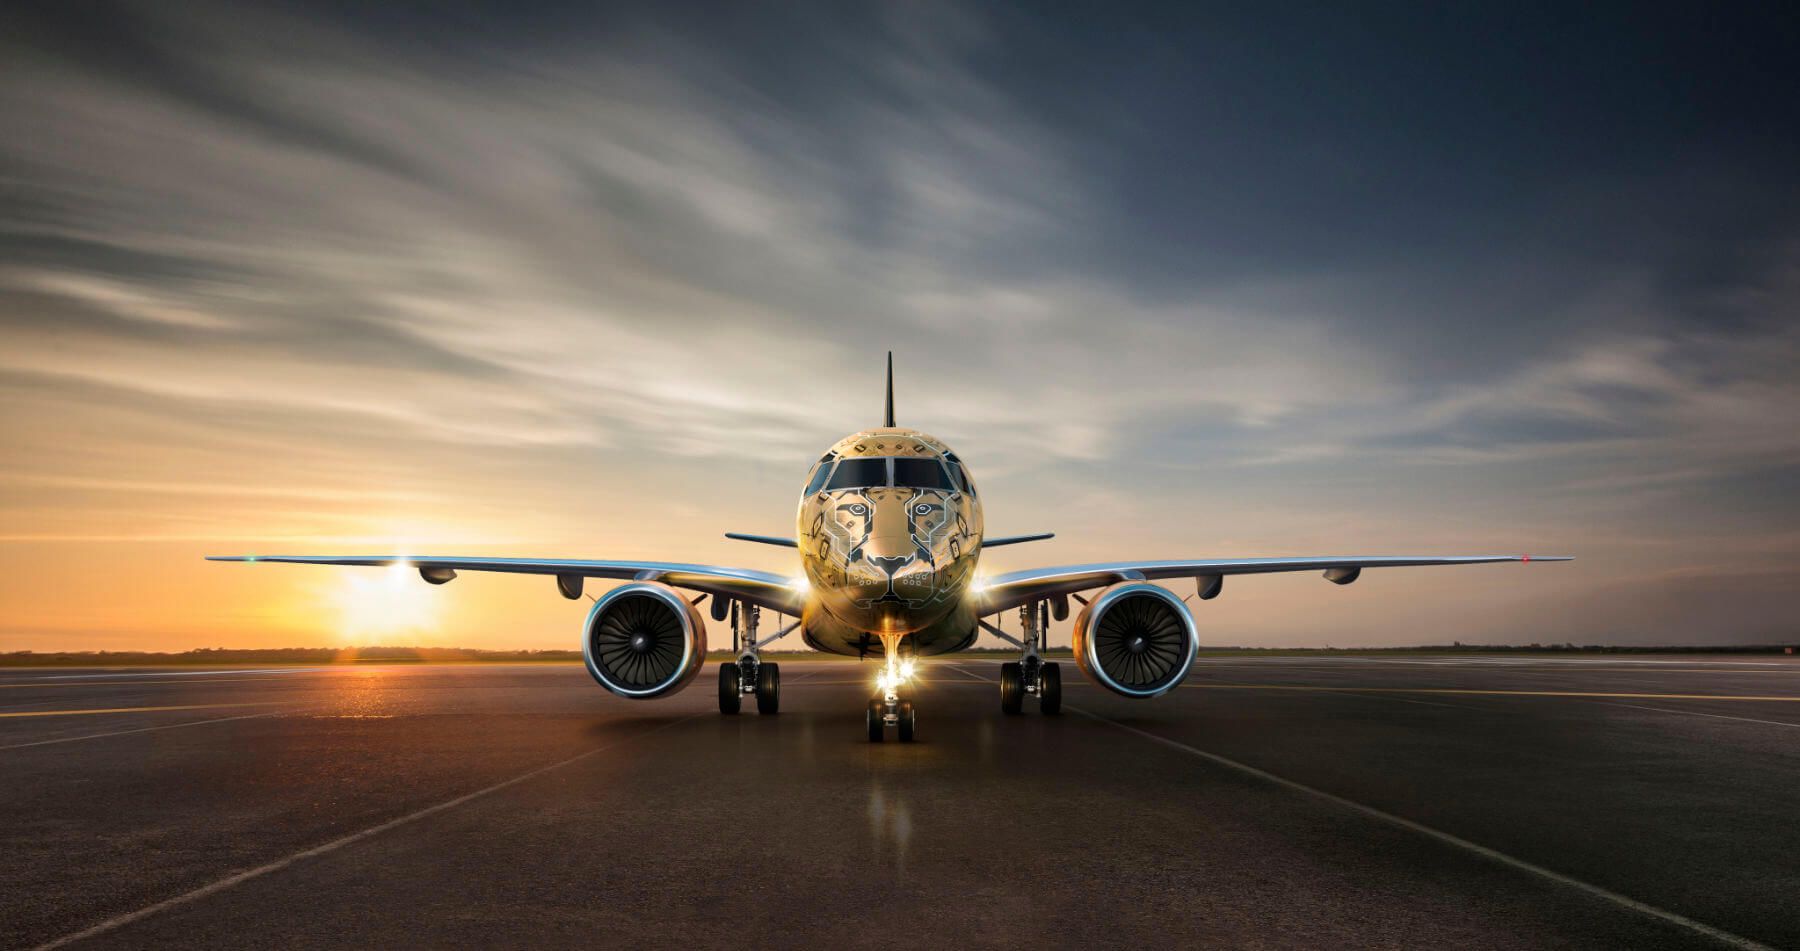 Embraer E175 on runway with sunset backdrop